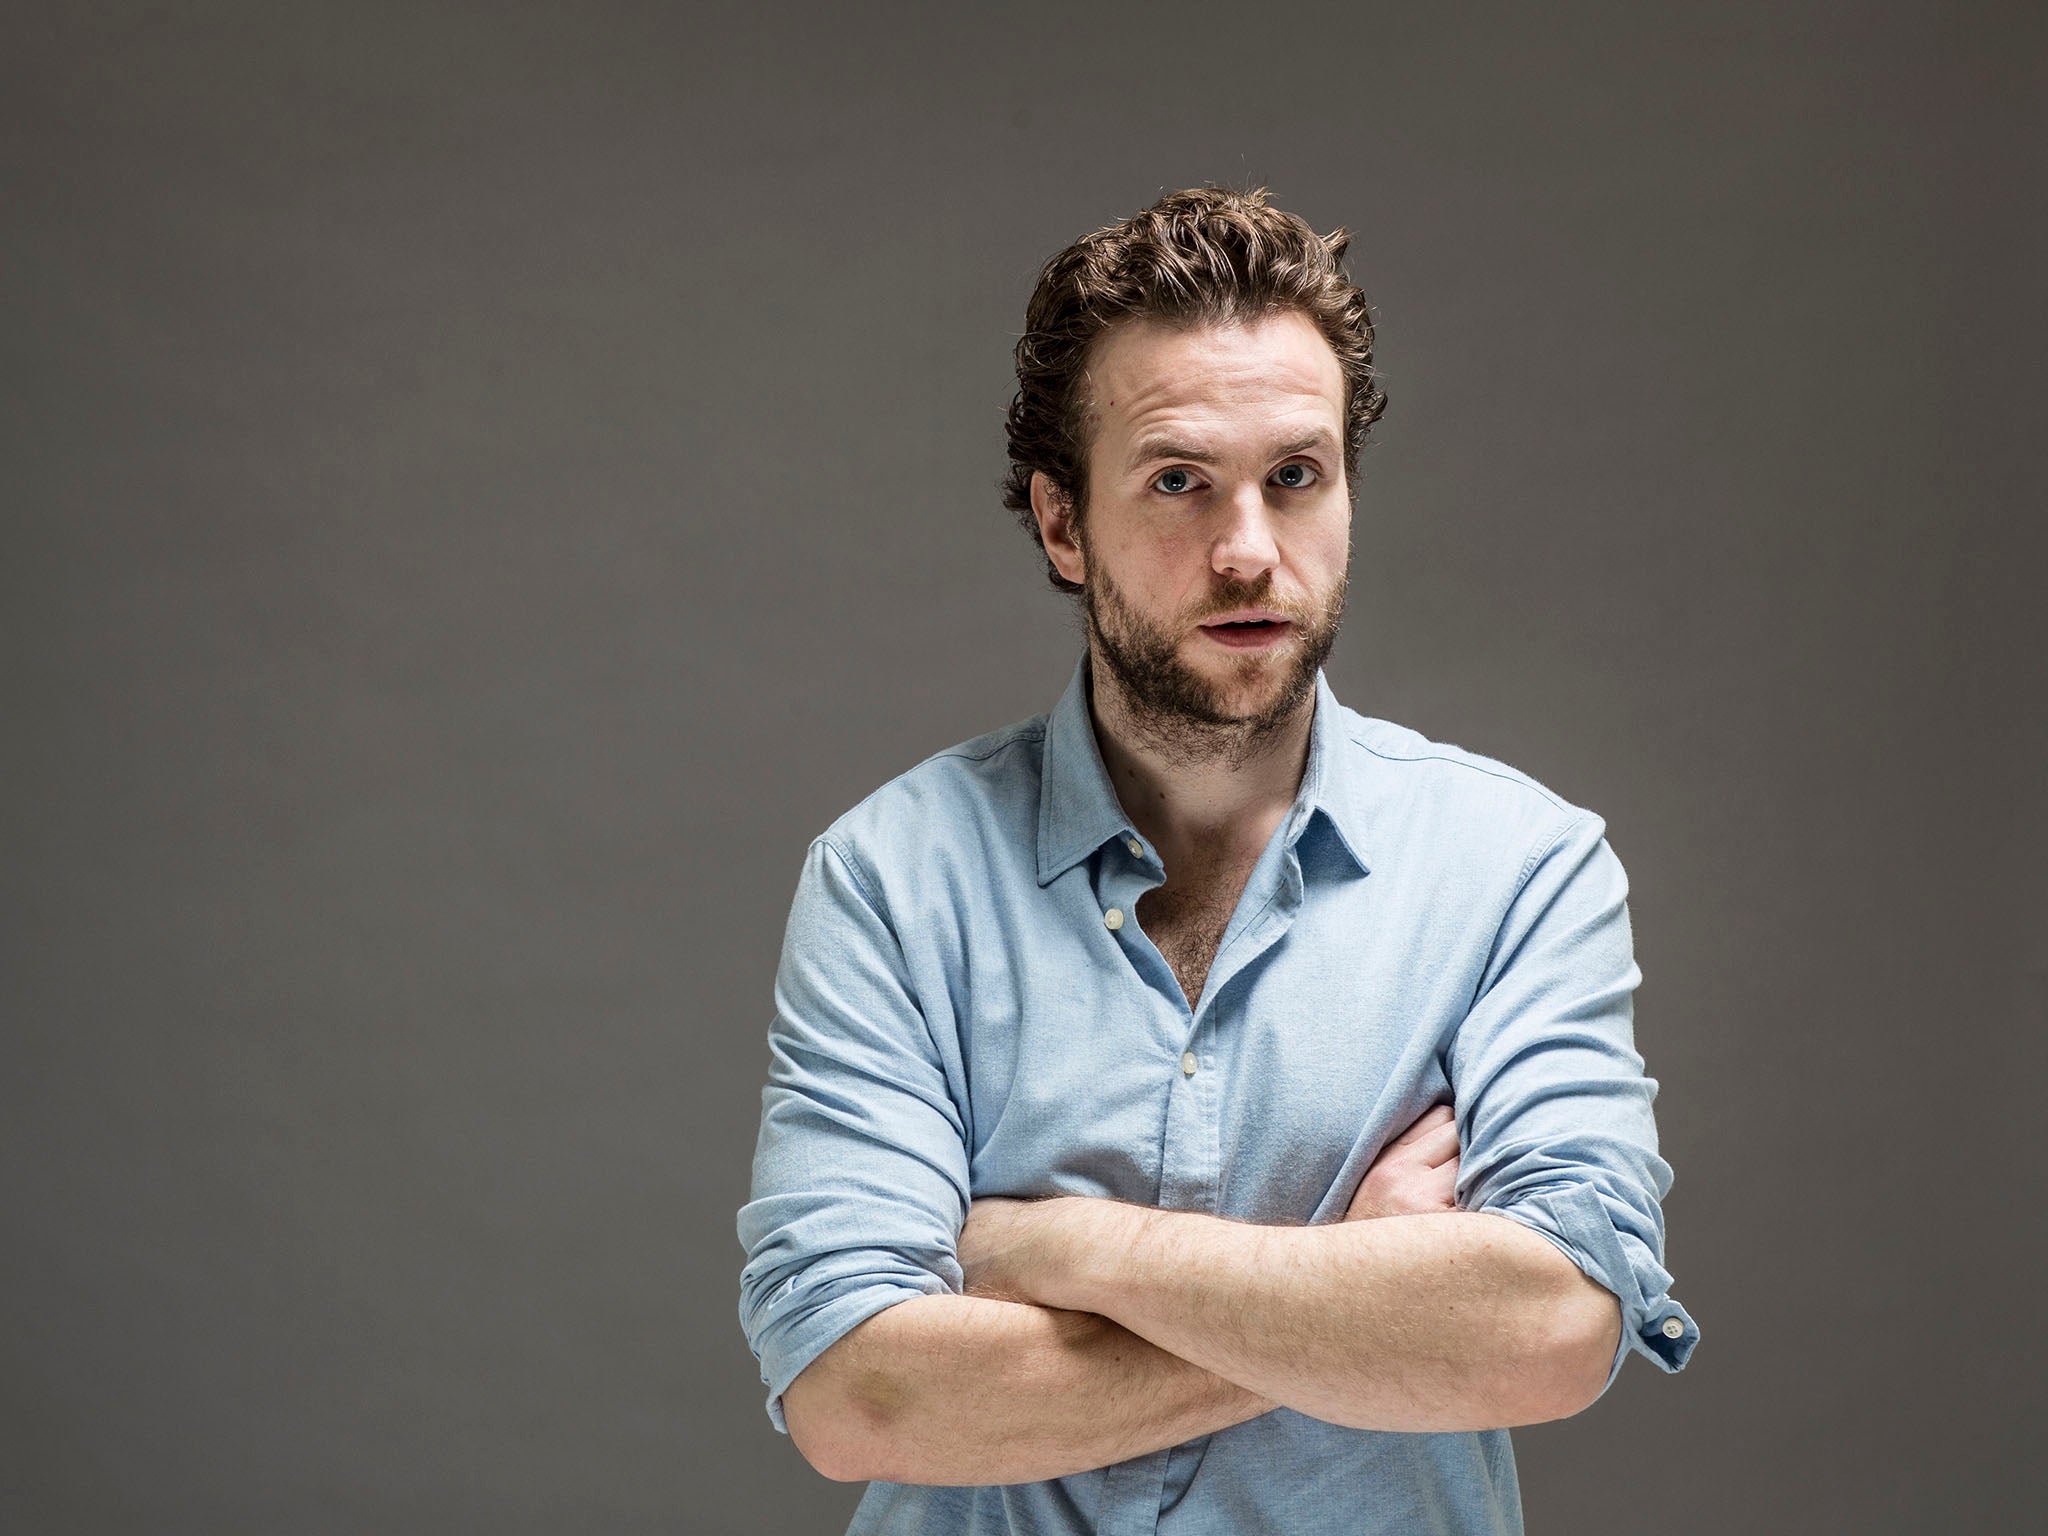 Rafe Joseph Spall is an English actor on both stage and screen. He is perhaps best known for his titular role in Channel 4's Pete Versus Life and his roles in One Day, Anonymous, and the Ridley Scott film Prometheus.